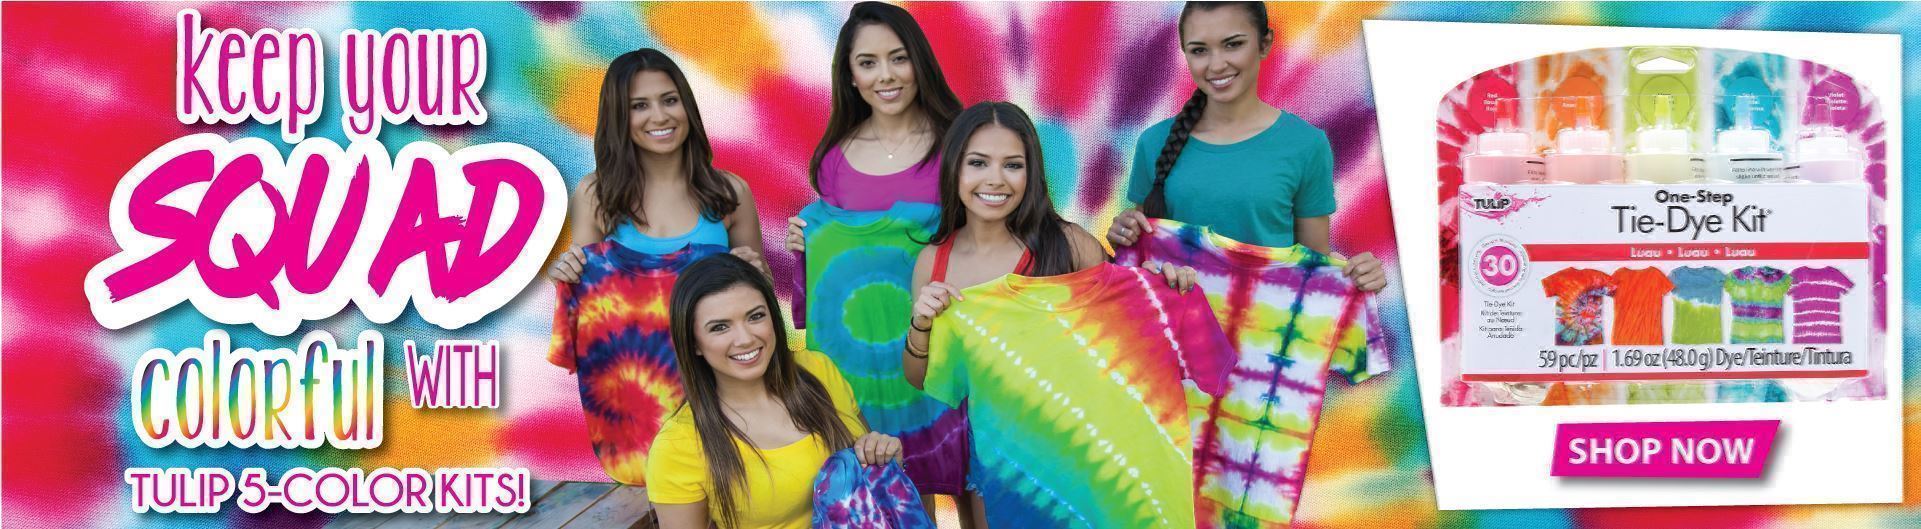 Picture of 5-Color Tie-Dye Kits